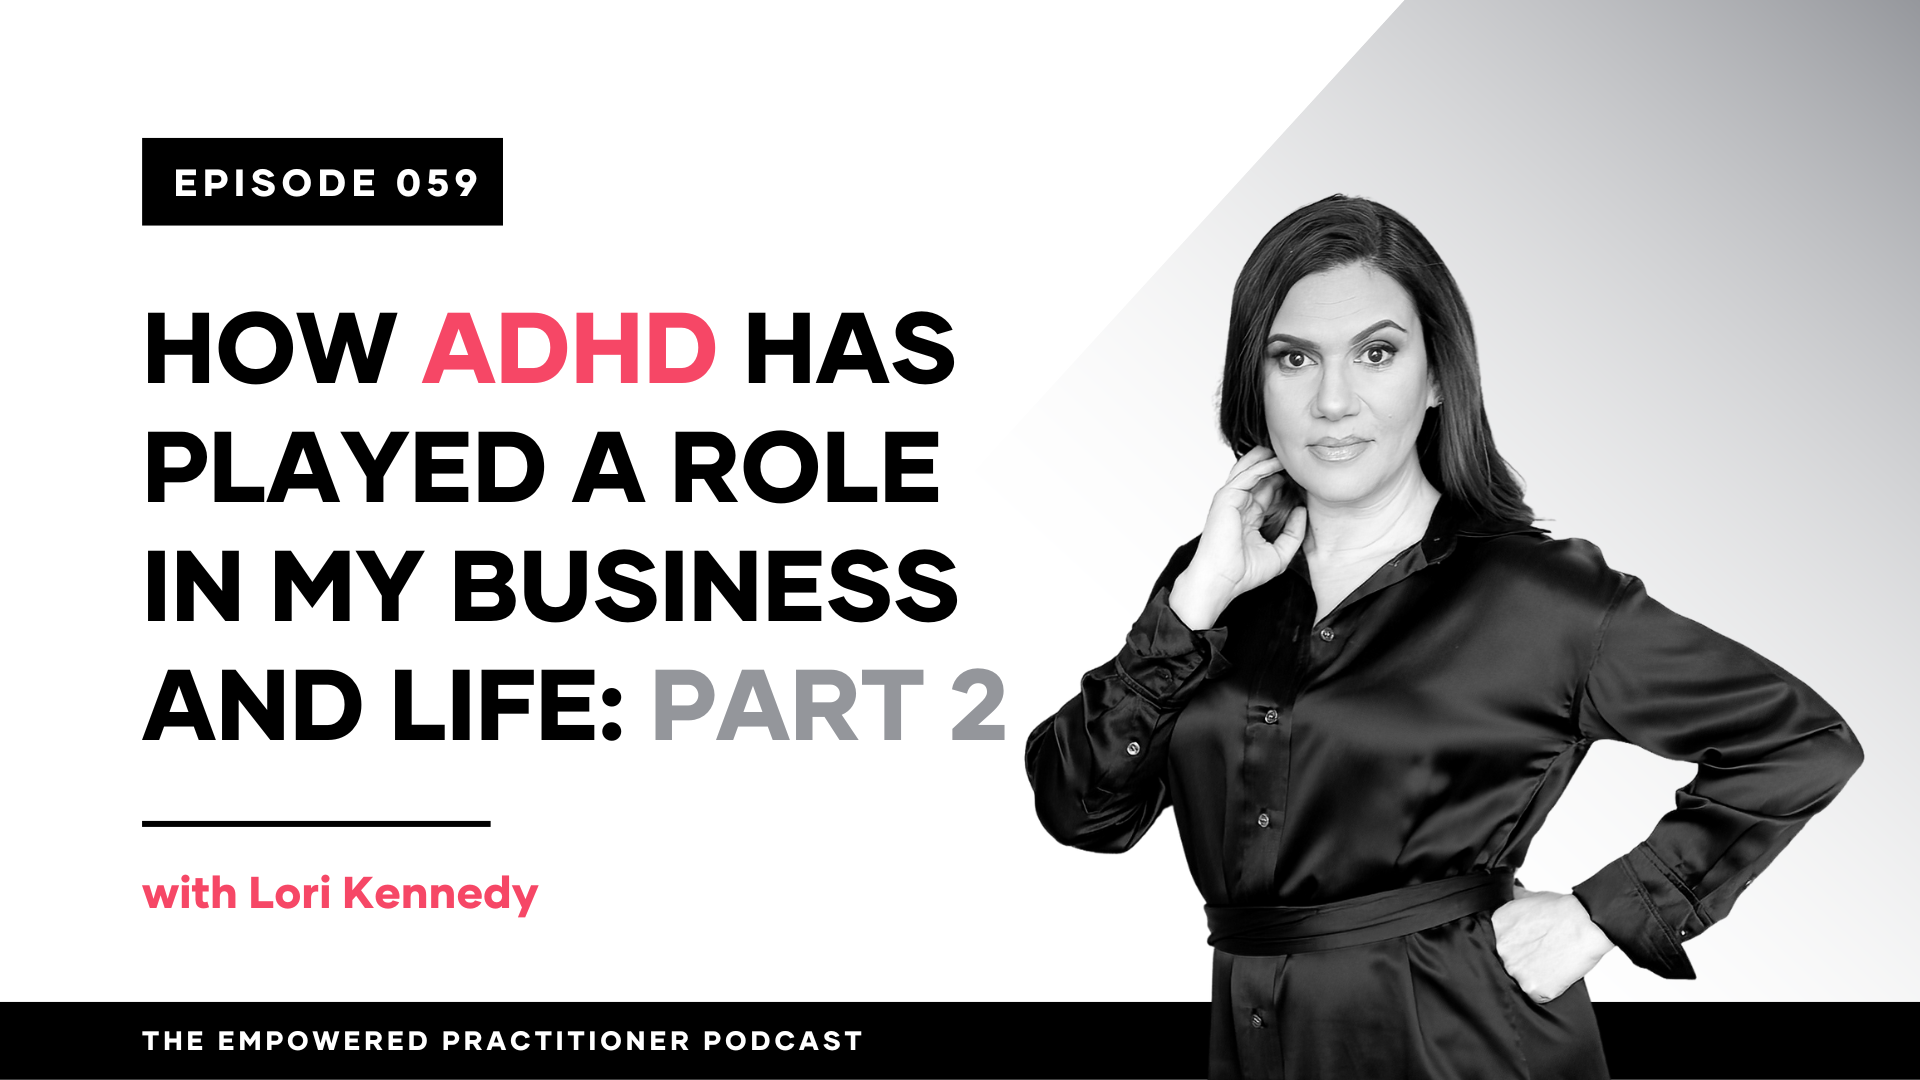 How ADHD Has Played a Role in My Business & Life Part 2